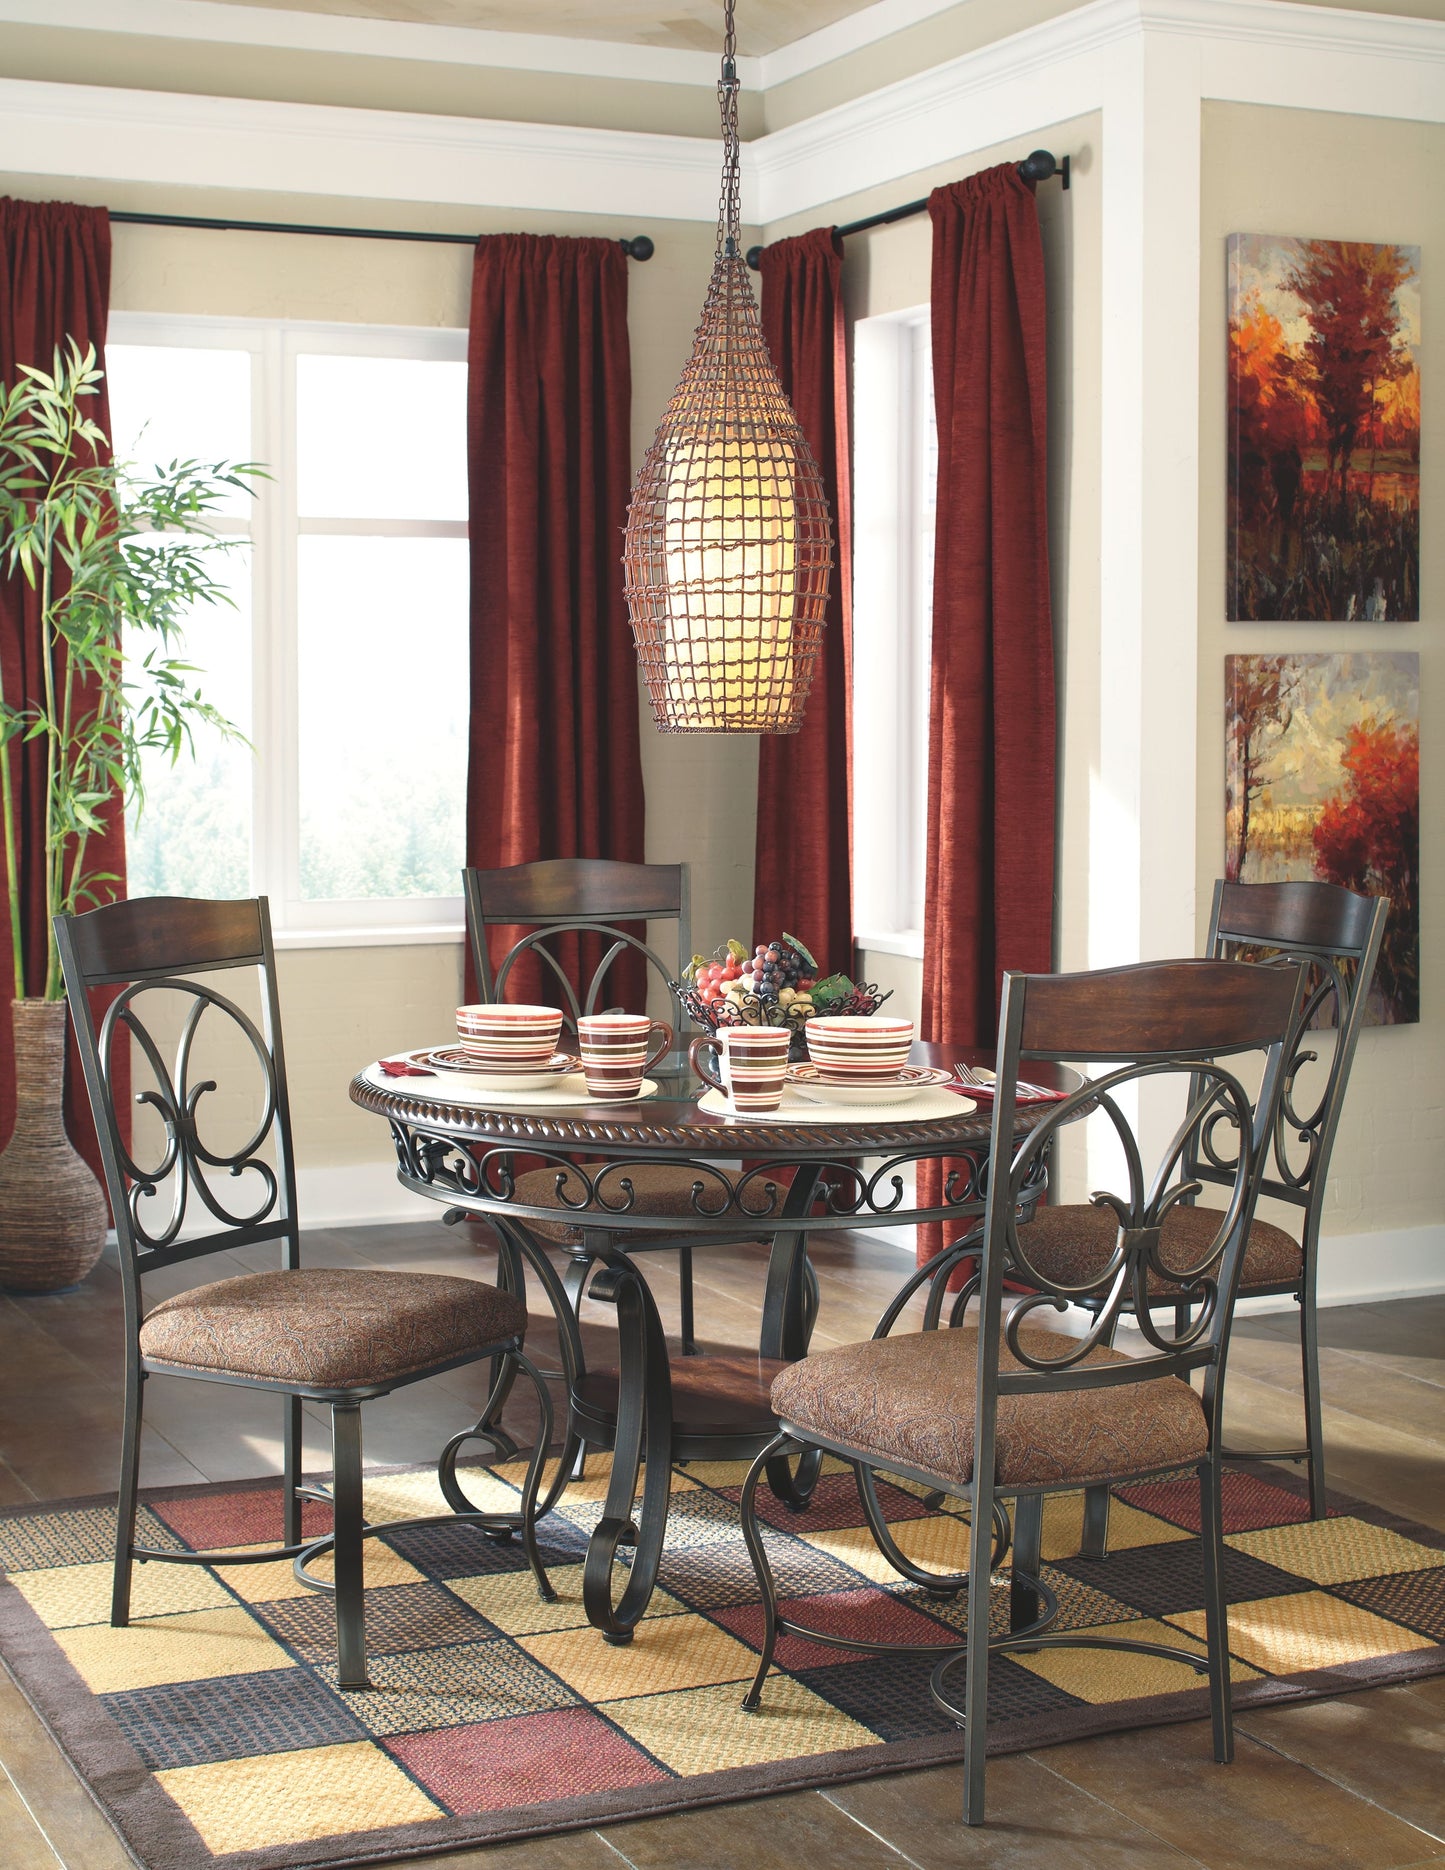 Glambrey - Brown - Dining Uph Side Chair (Set of 4)